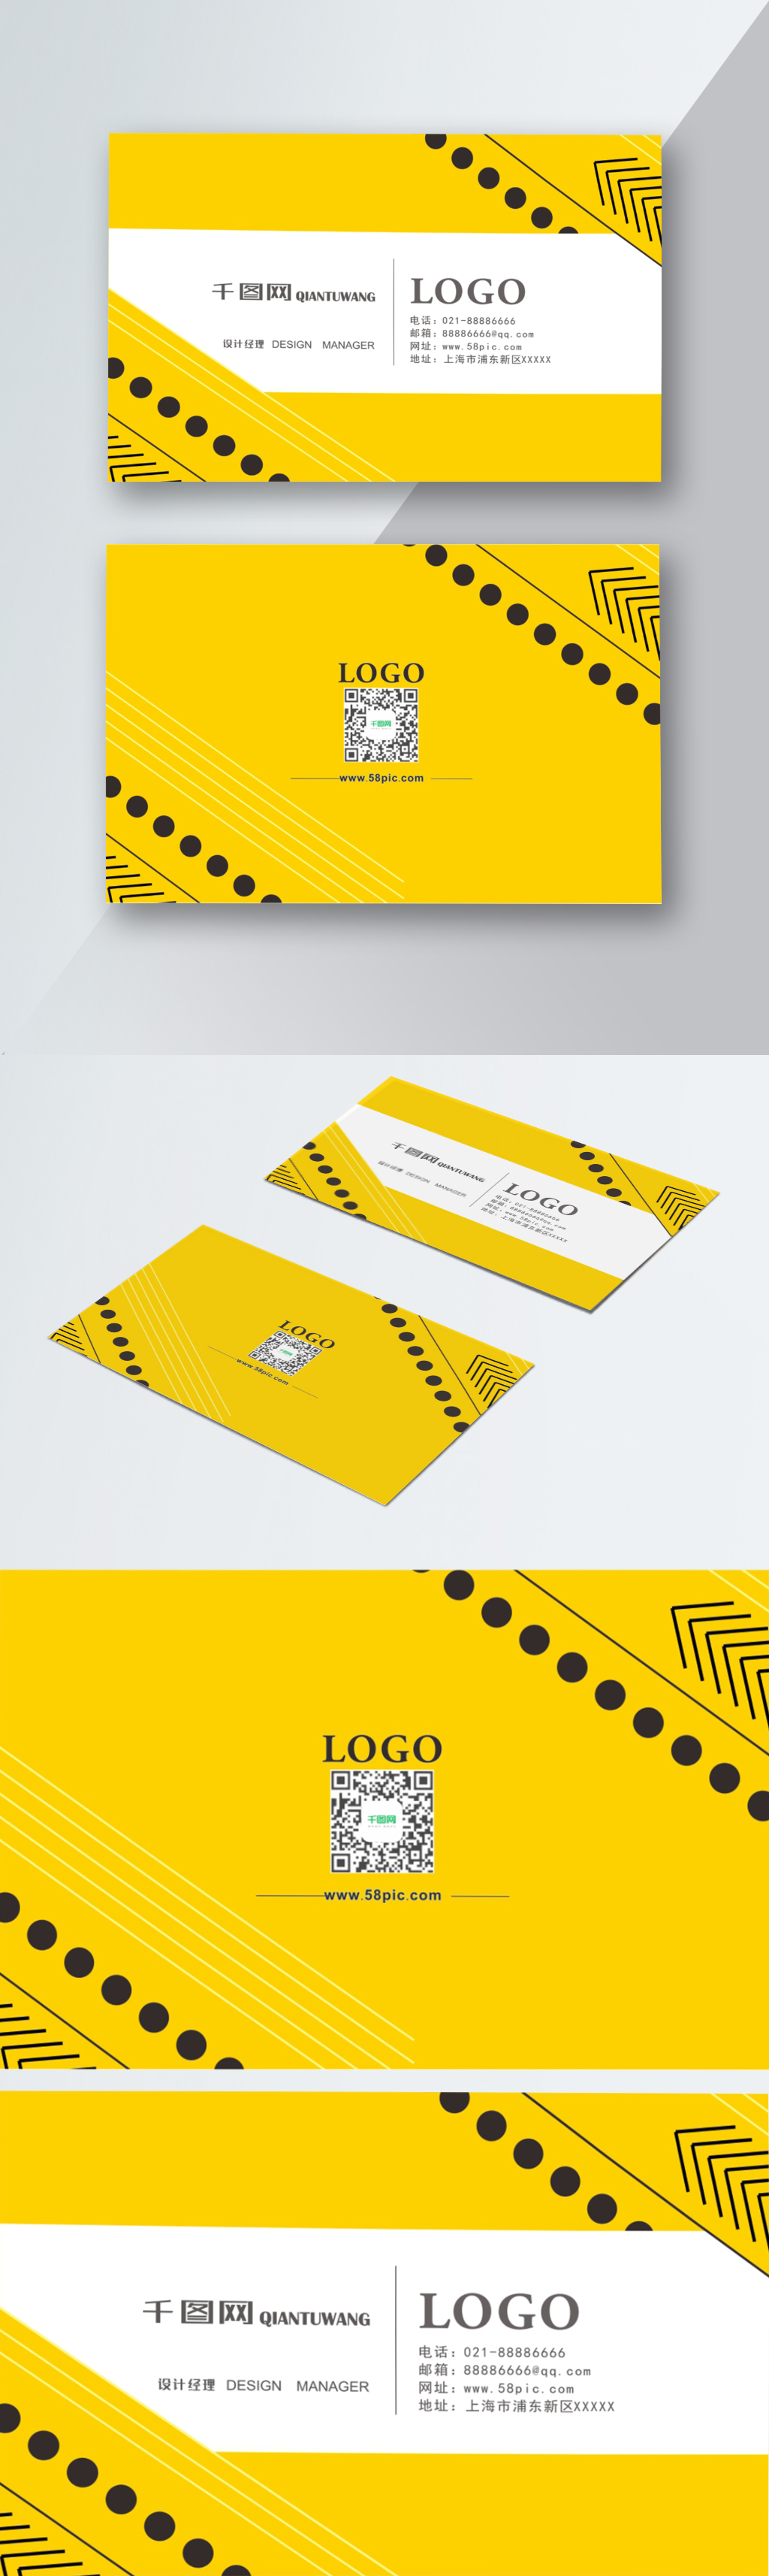 Download Yellow Creative Business Card Design Template Image Picture Free Download 400727796 Lovepik Com Yellowimages Mockups